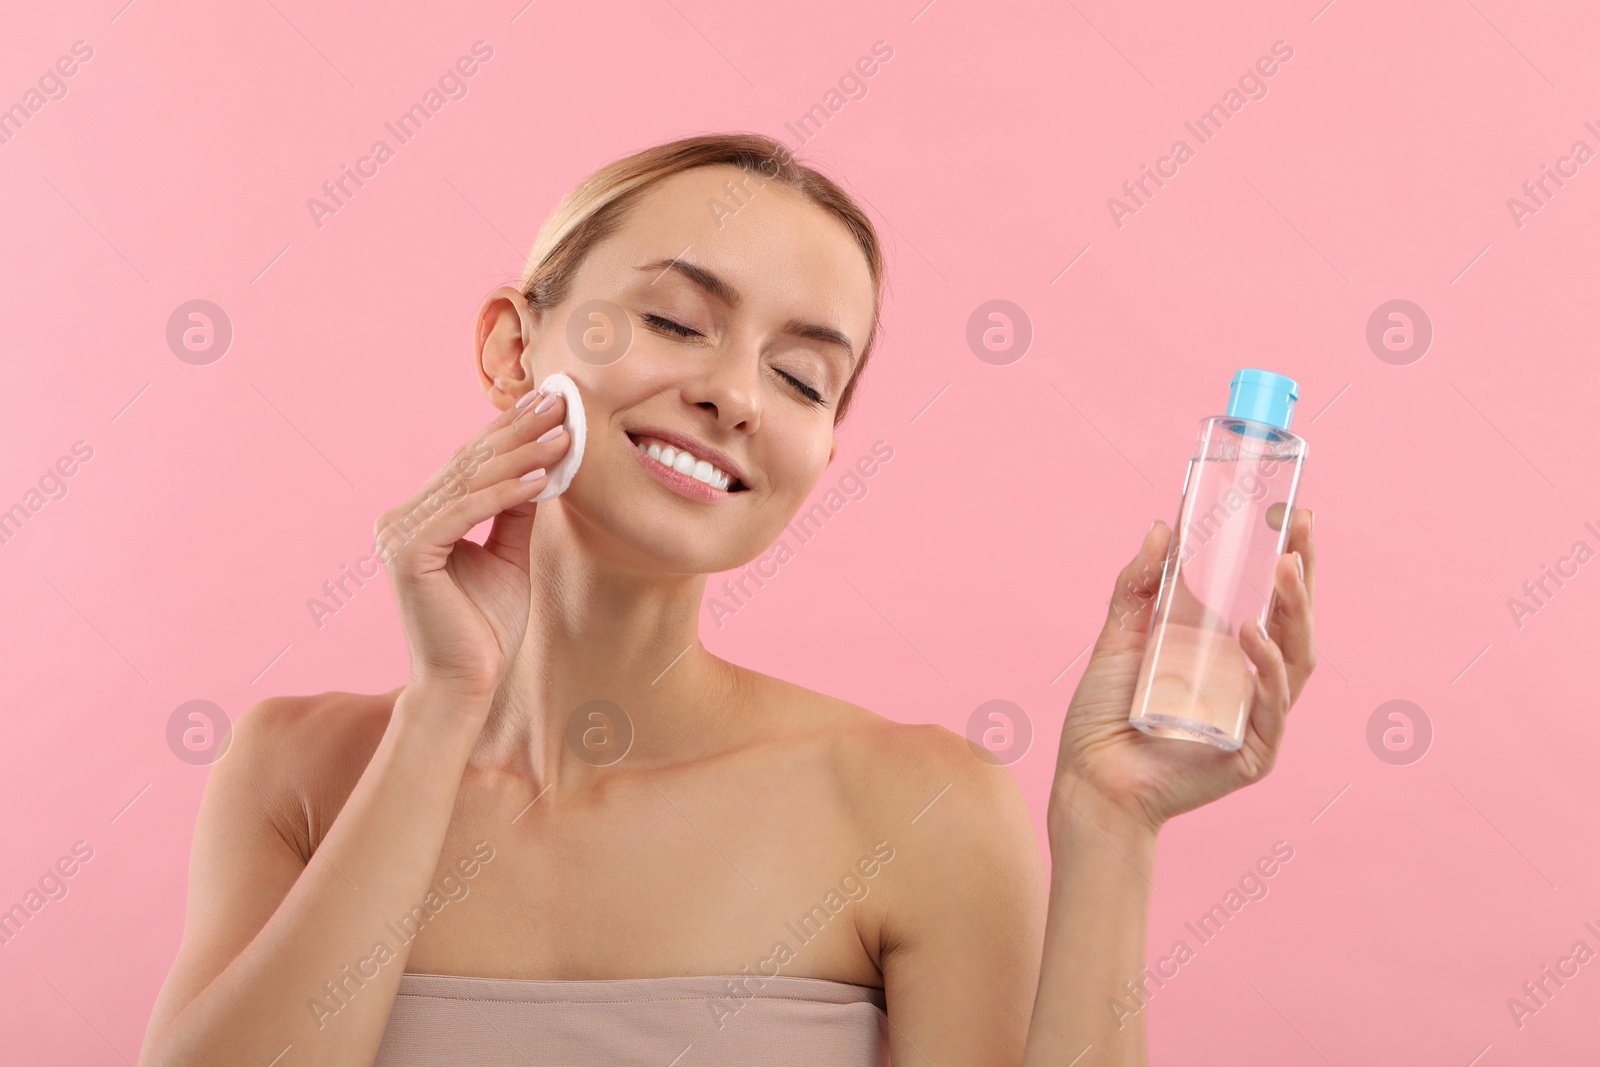 Photo of Smiling woman removing makeup with cotton pad and holding bottle on pink background